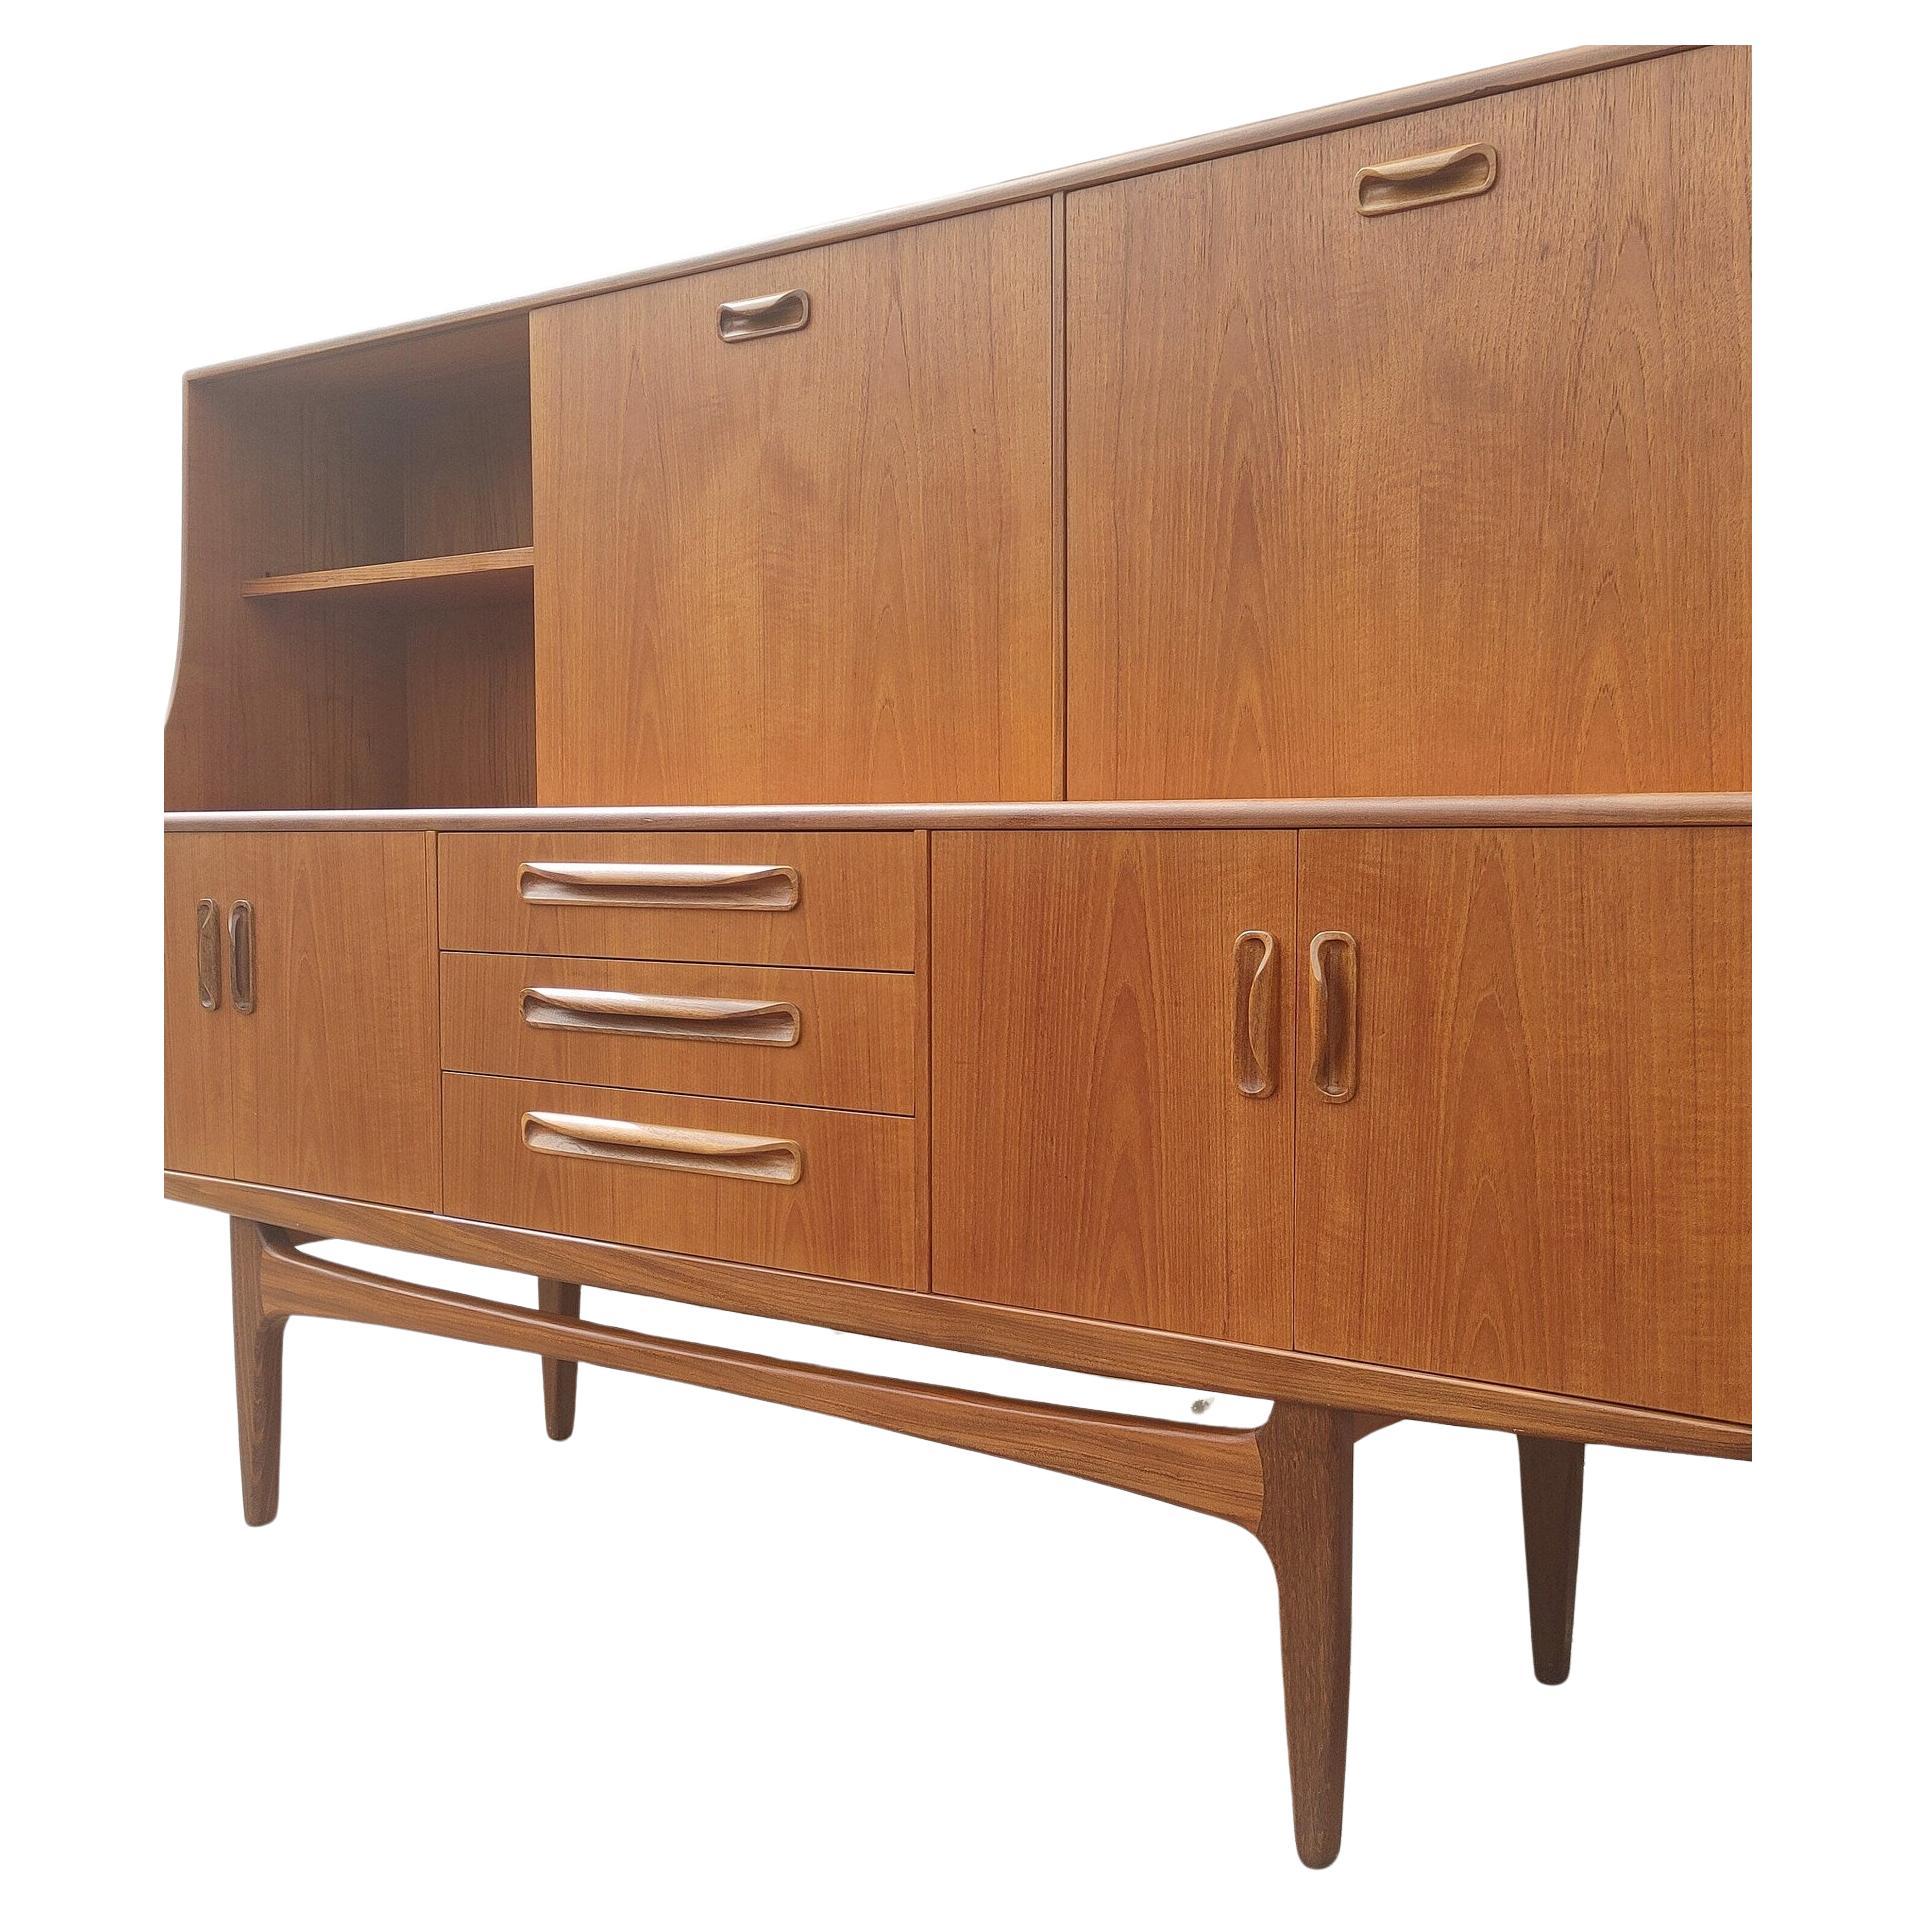 Mid Century English Modern G Plan Teak Hutch
 
Above average vintage condition and structurally sound. Has some expected slight finish wear and scratching. One area on left upper hutch has missing veneer. Outdoor listing pictures might appear